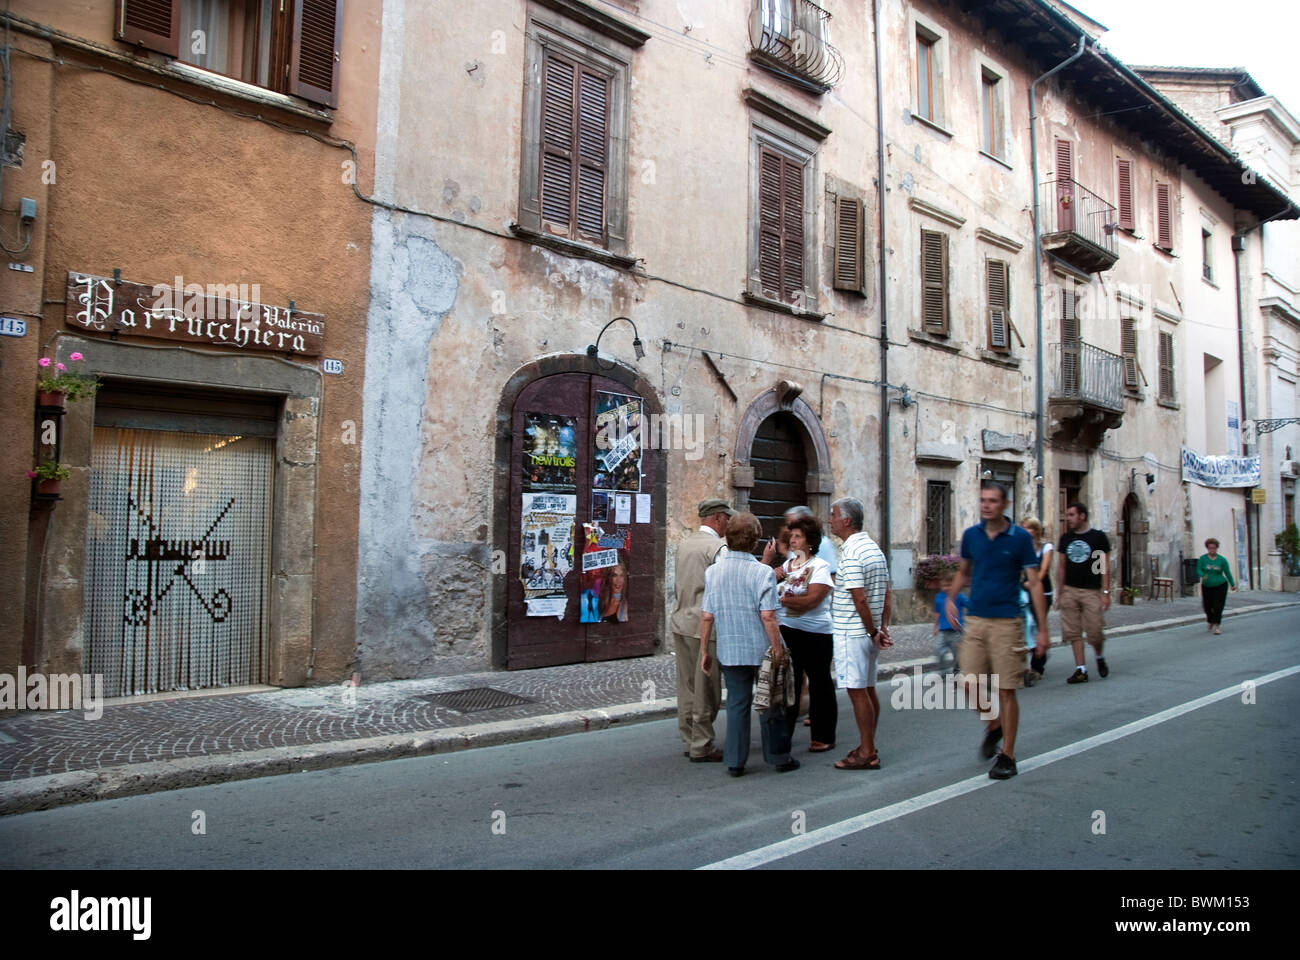 People chat in the street, early evening Corso San Giuseppe, Leonessa, Province of Rieti, Lazio, Italy Stock Photo